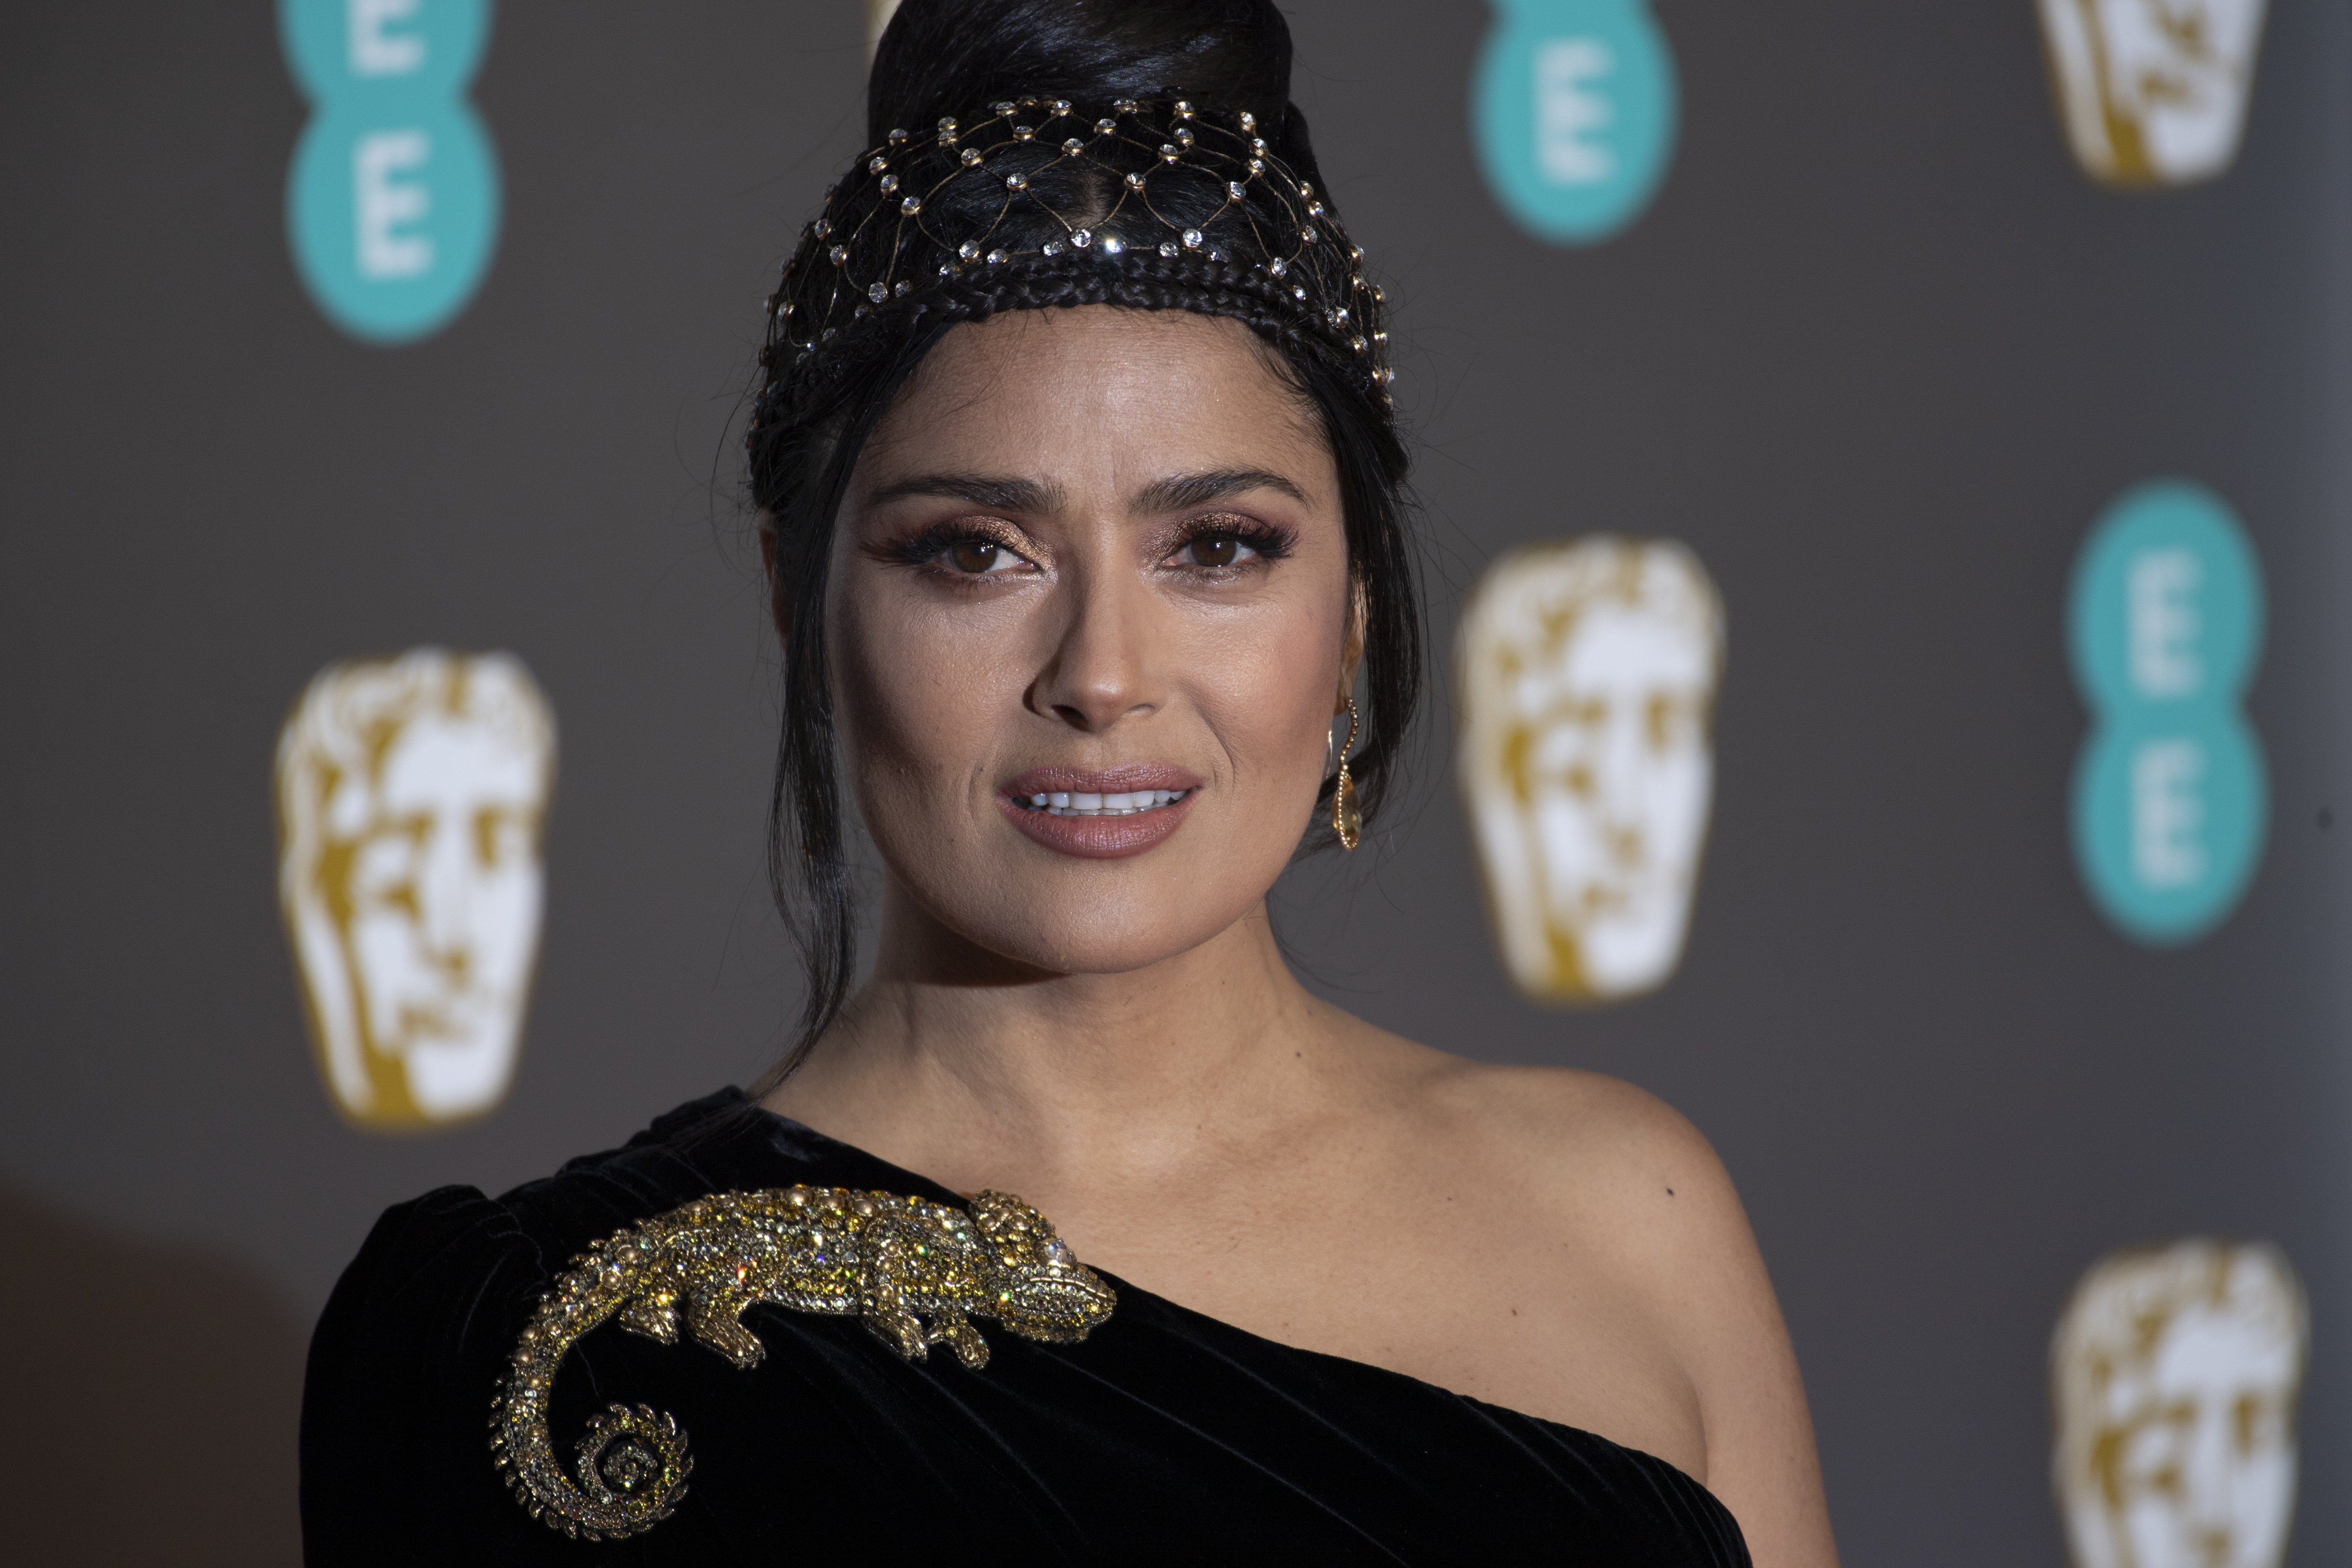 Salma Hayek attends the British Academy Film Awards on February 10, 2019, in London, England. | Source: Getty Images.